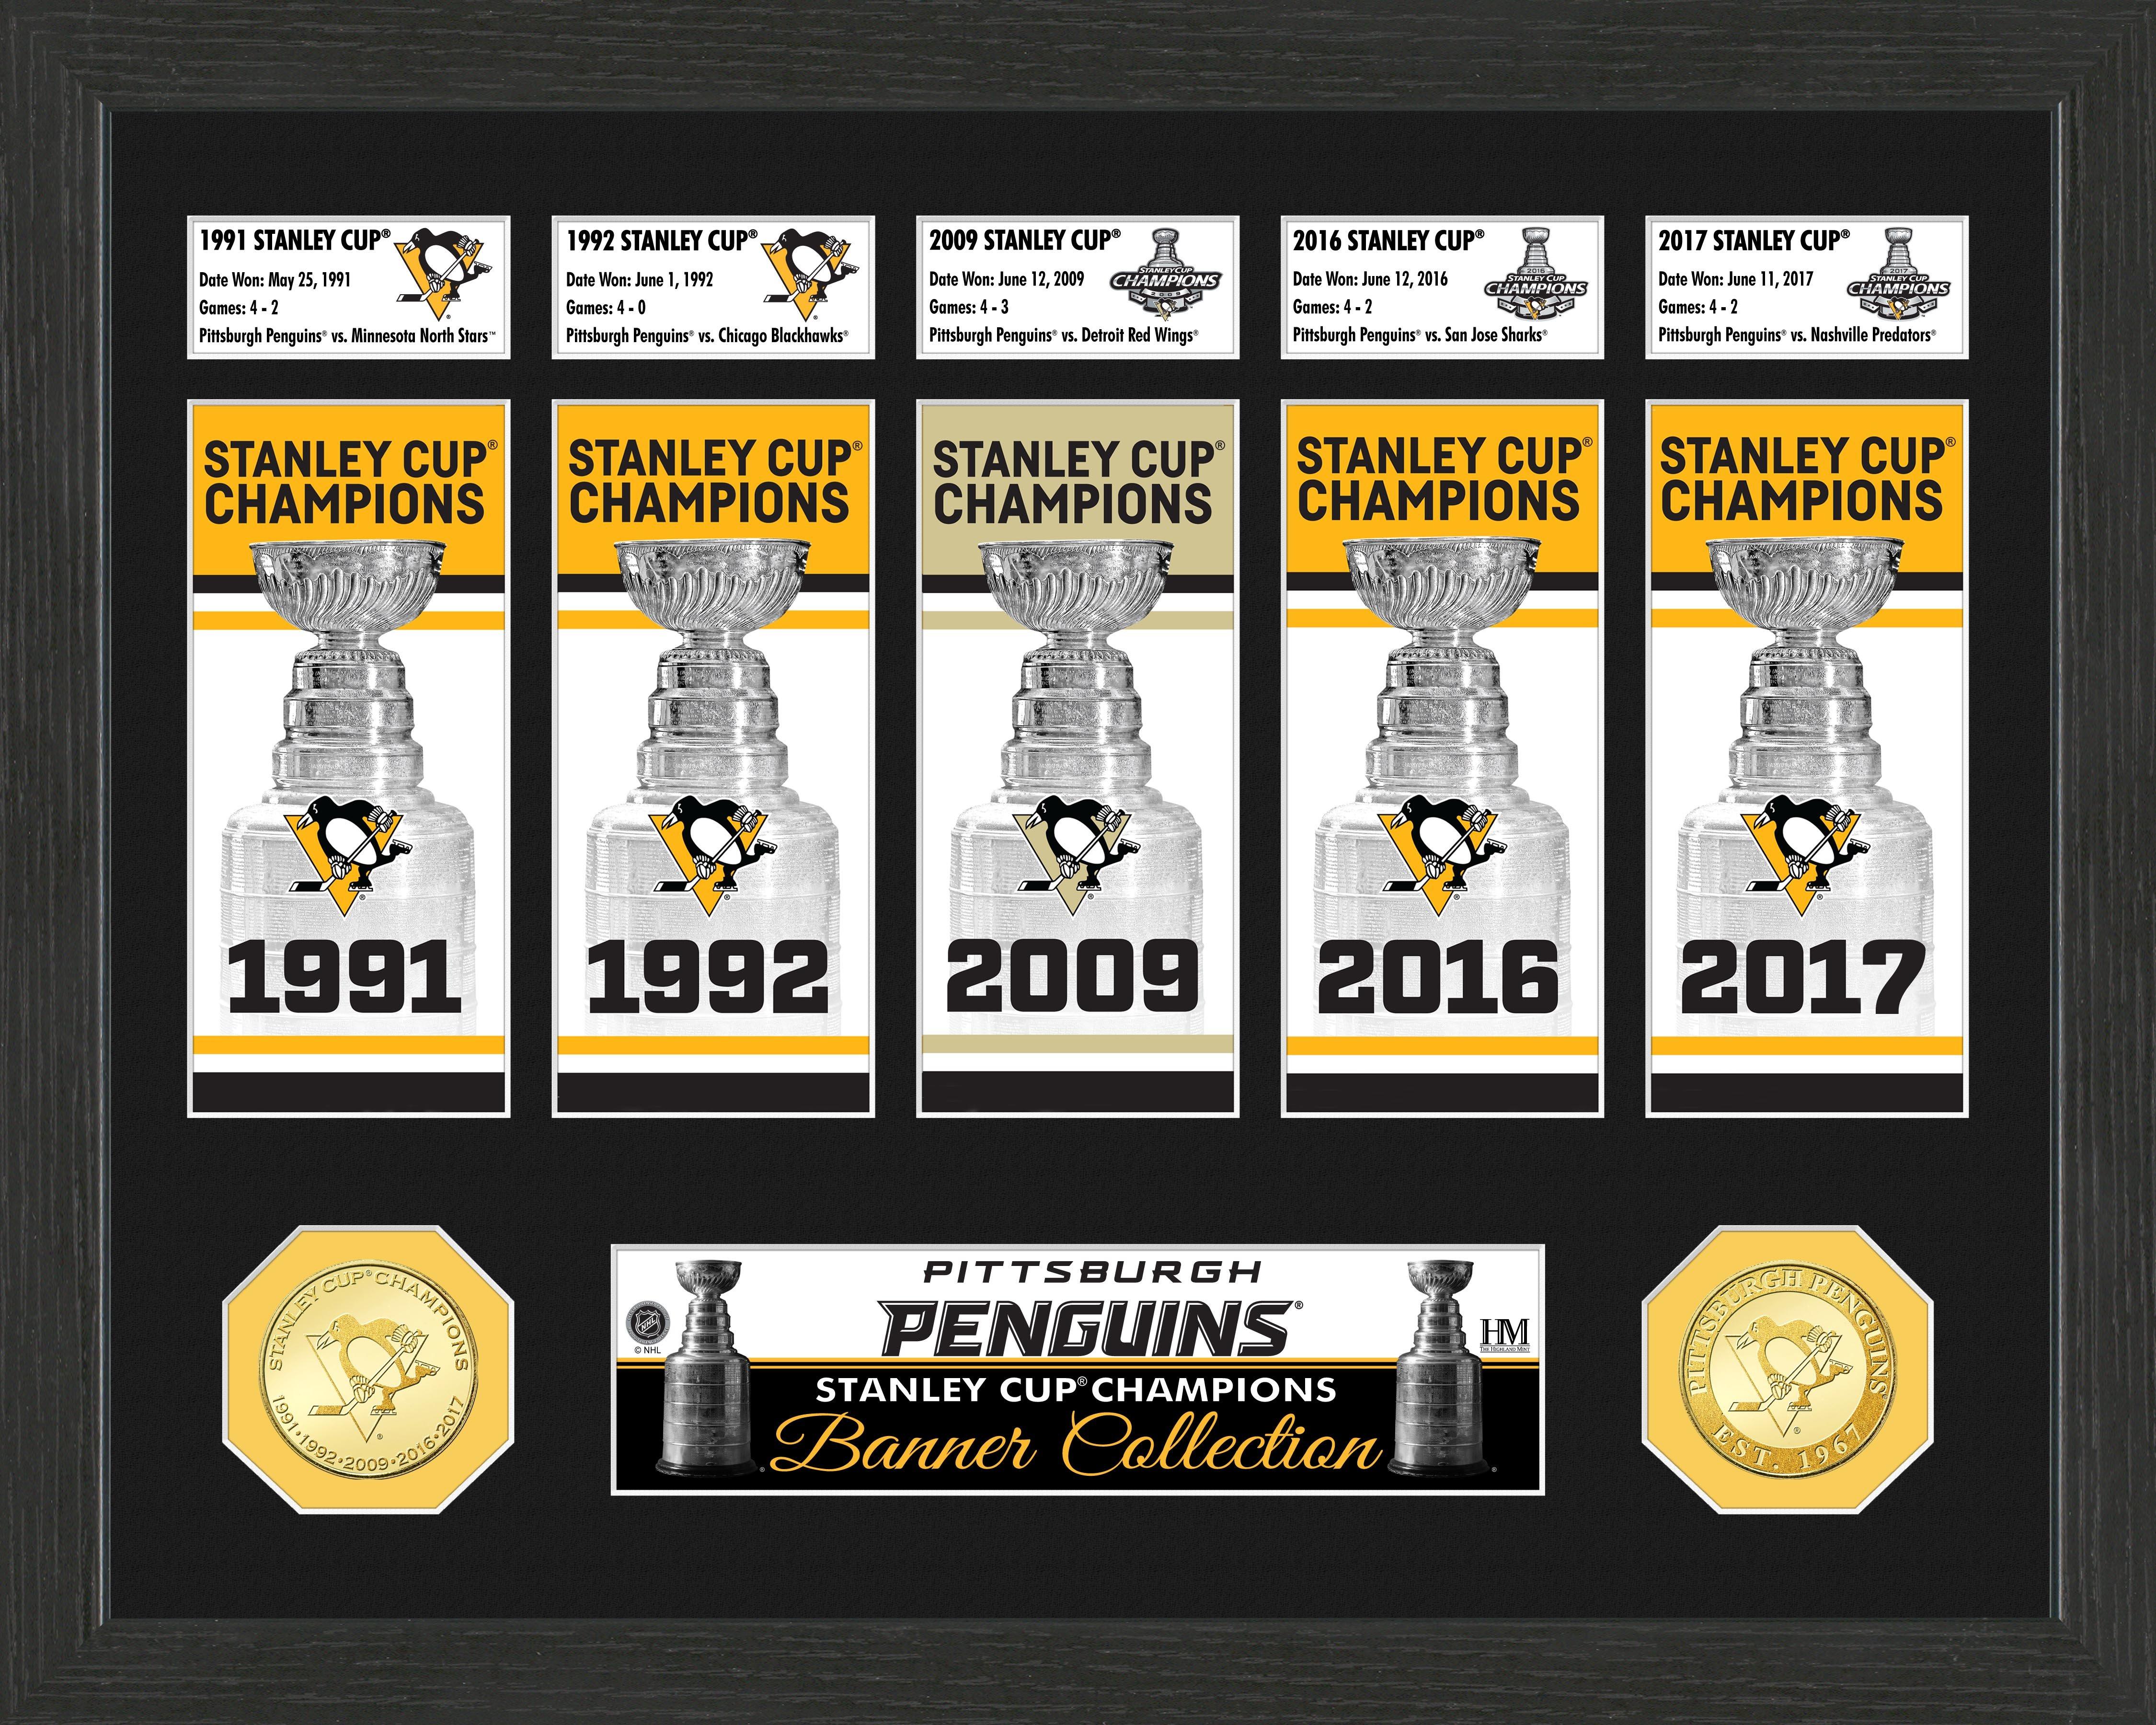 Pittsburgh Penguins on X: New banners this year for the Penguins